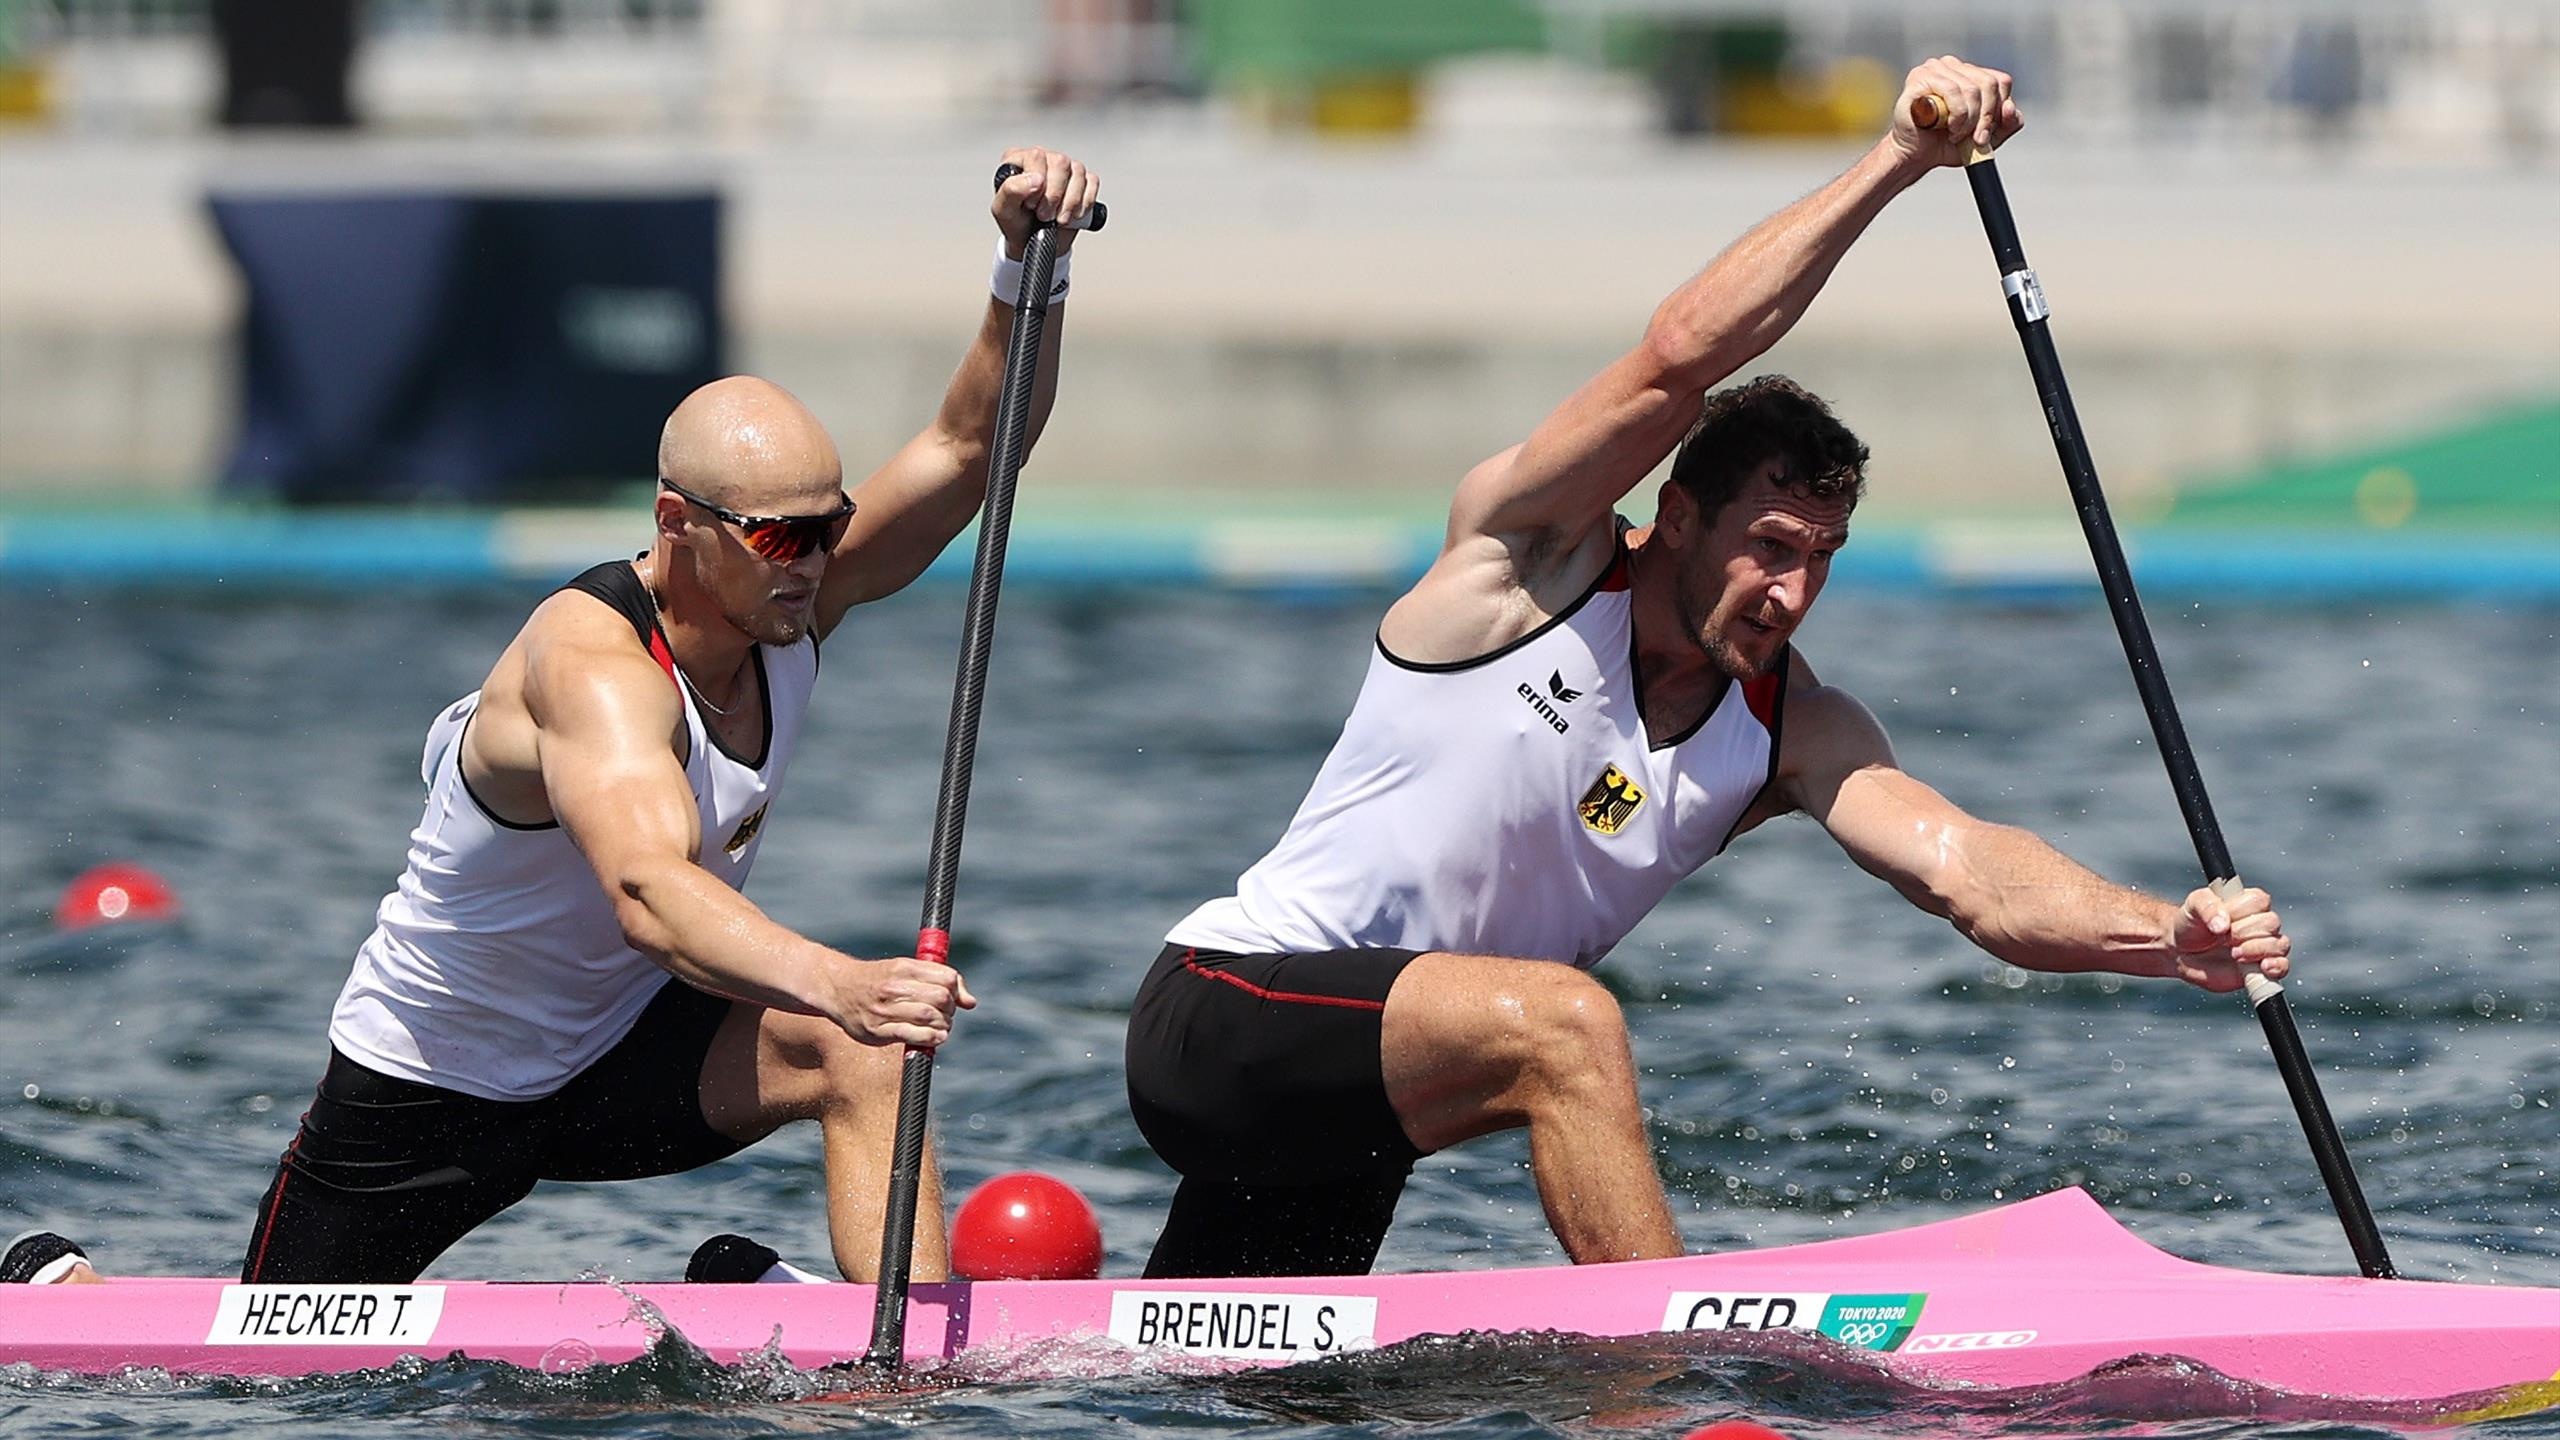 Canoeing: Sebastian Brendel and Tim Hecker of Germany compete at the Tokyo 2020 Summer Olympics. 2560x1440 HD Wallpaper.